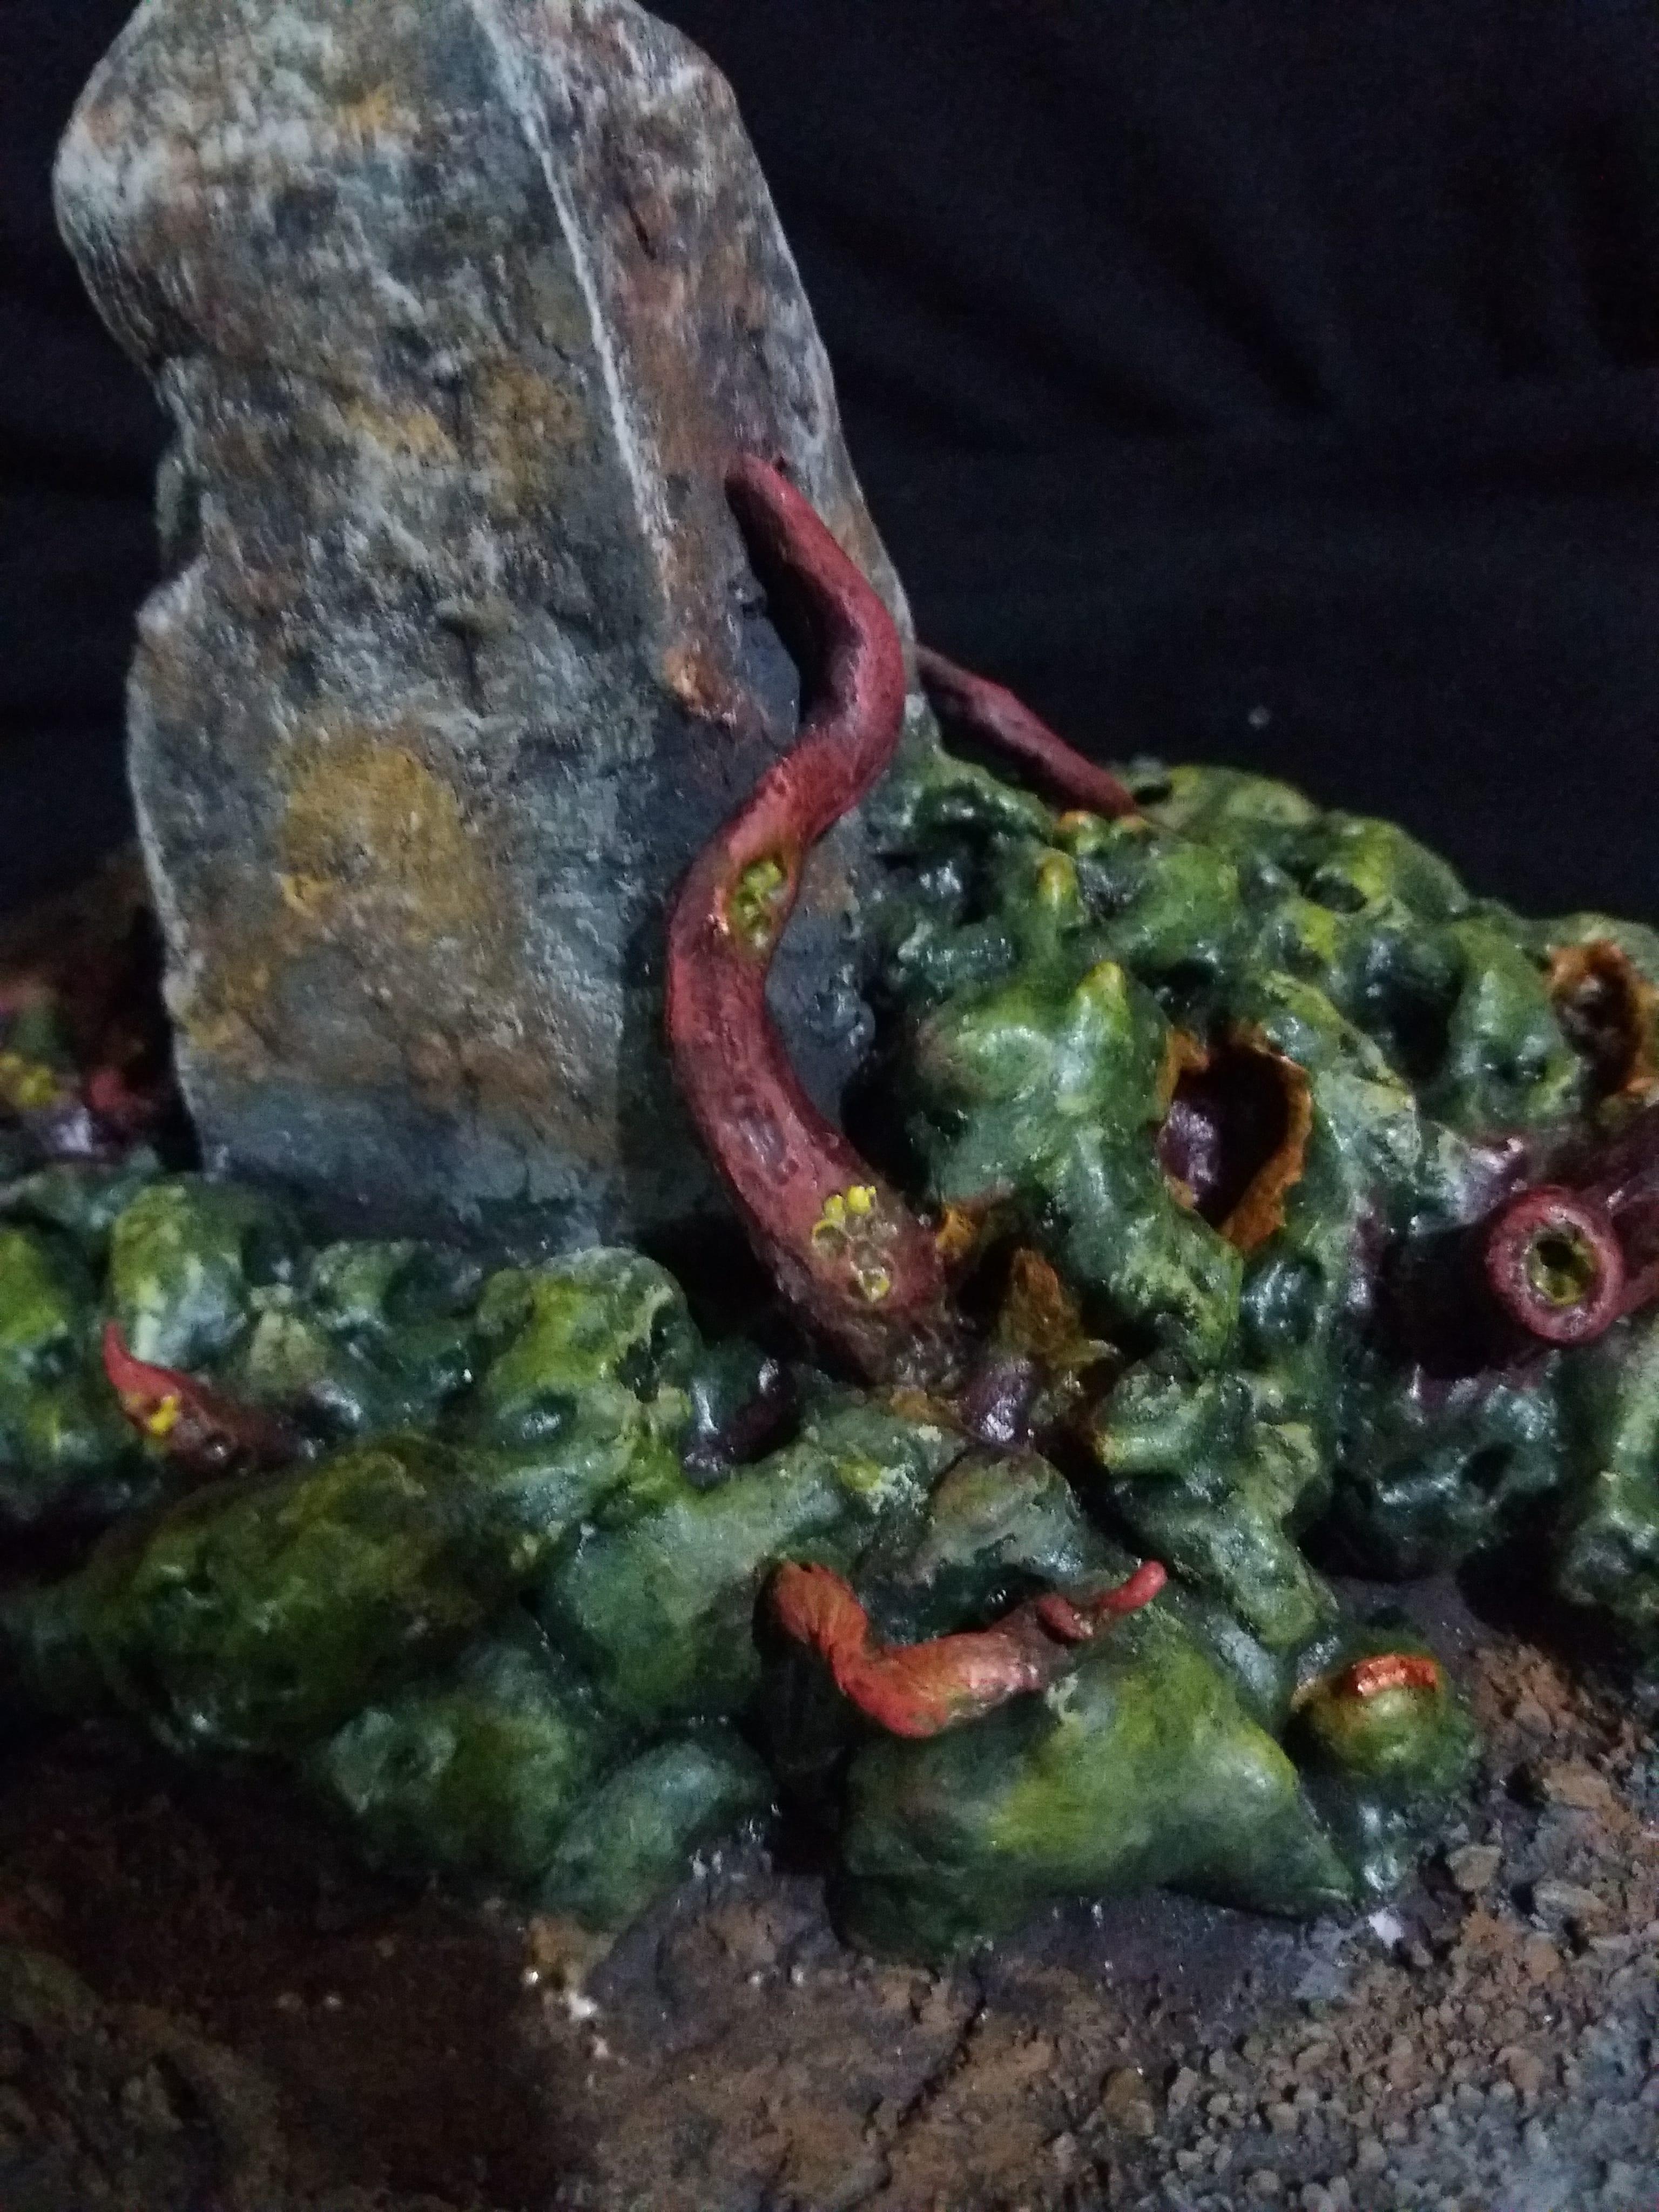 Age, Eyes, Infested, Nurgle, Obelisk, Sigmar, Stone, Tentacles, Terrain, Ulcers, Warhammer Fantasy, Worms